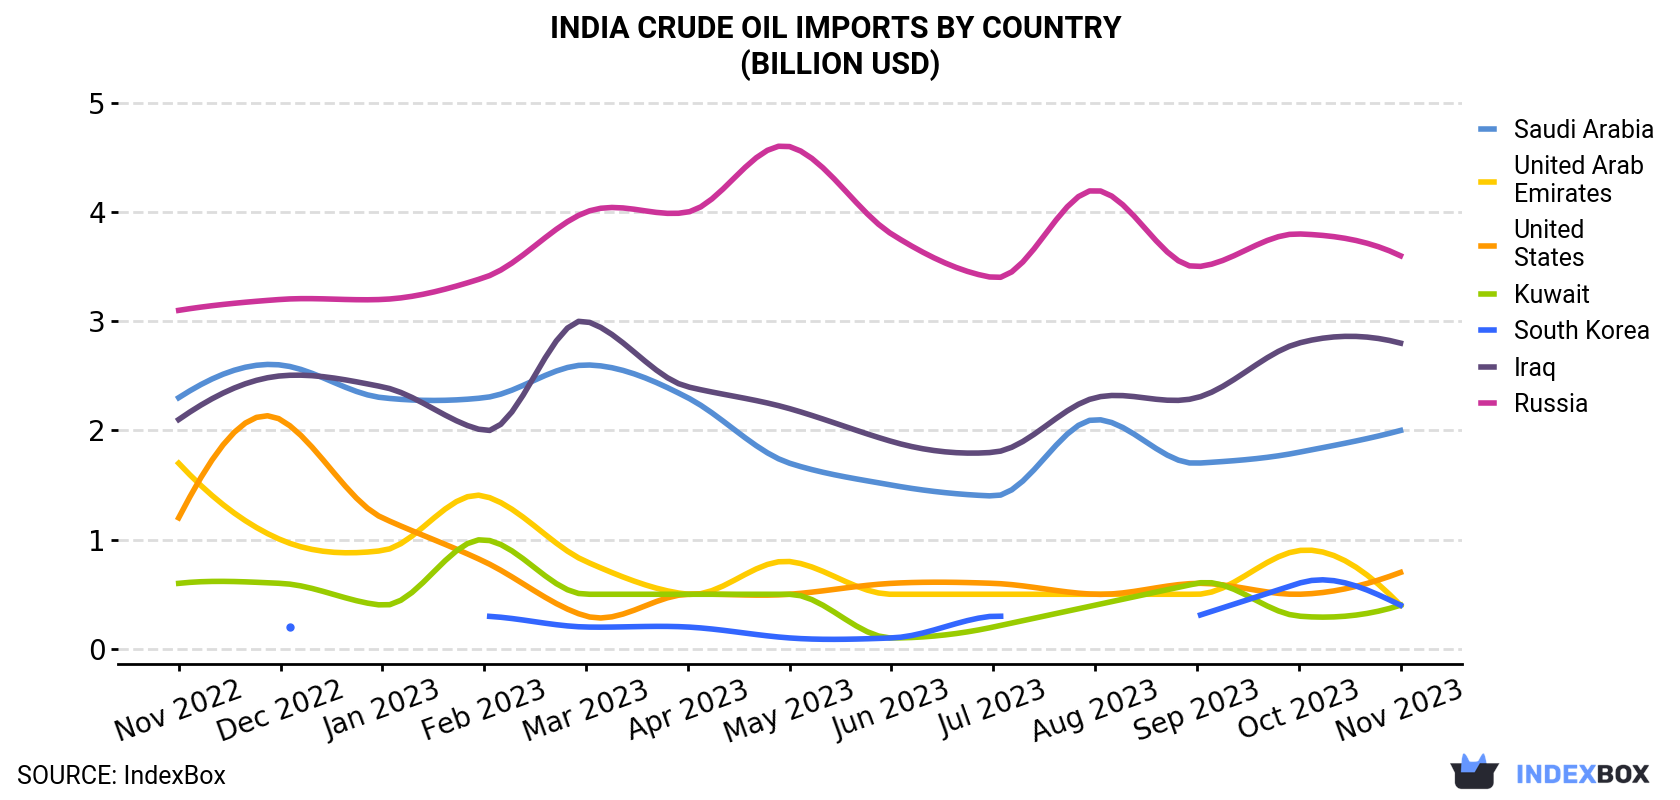 India Crude Oil Imports By Country (Billion USD)